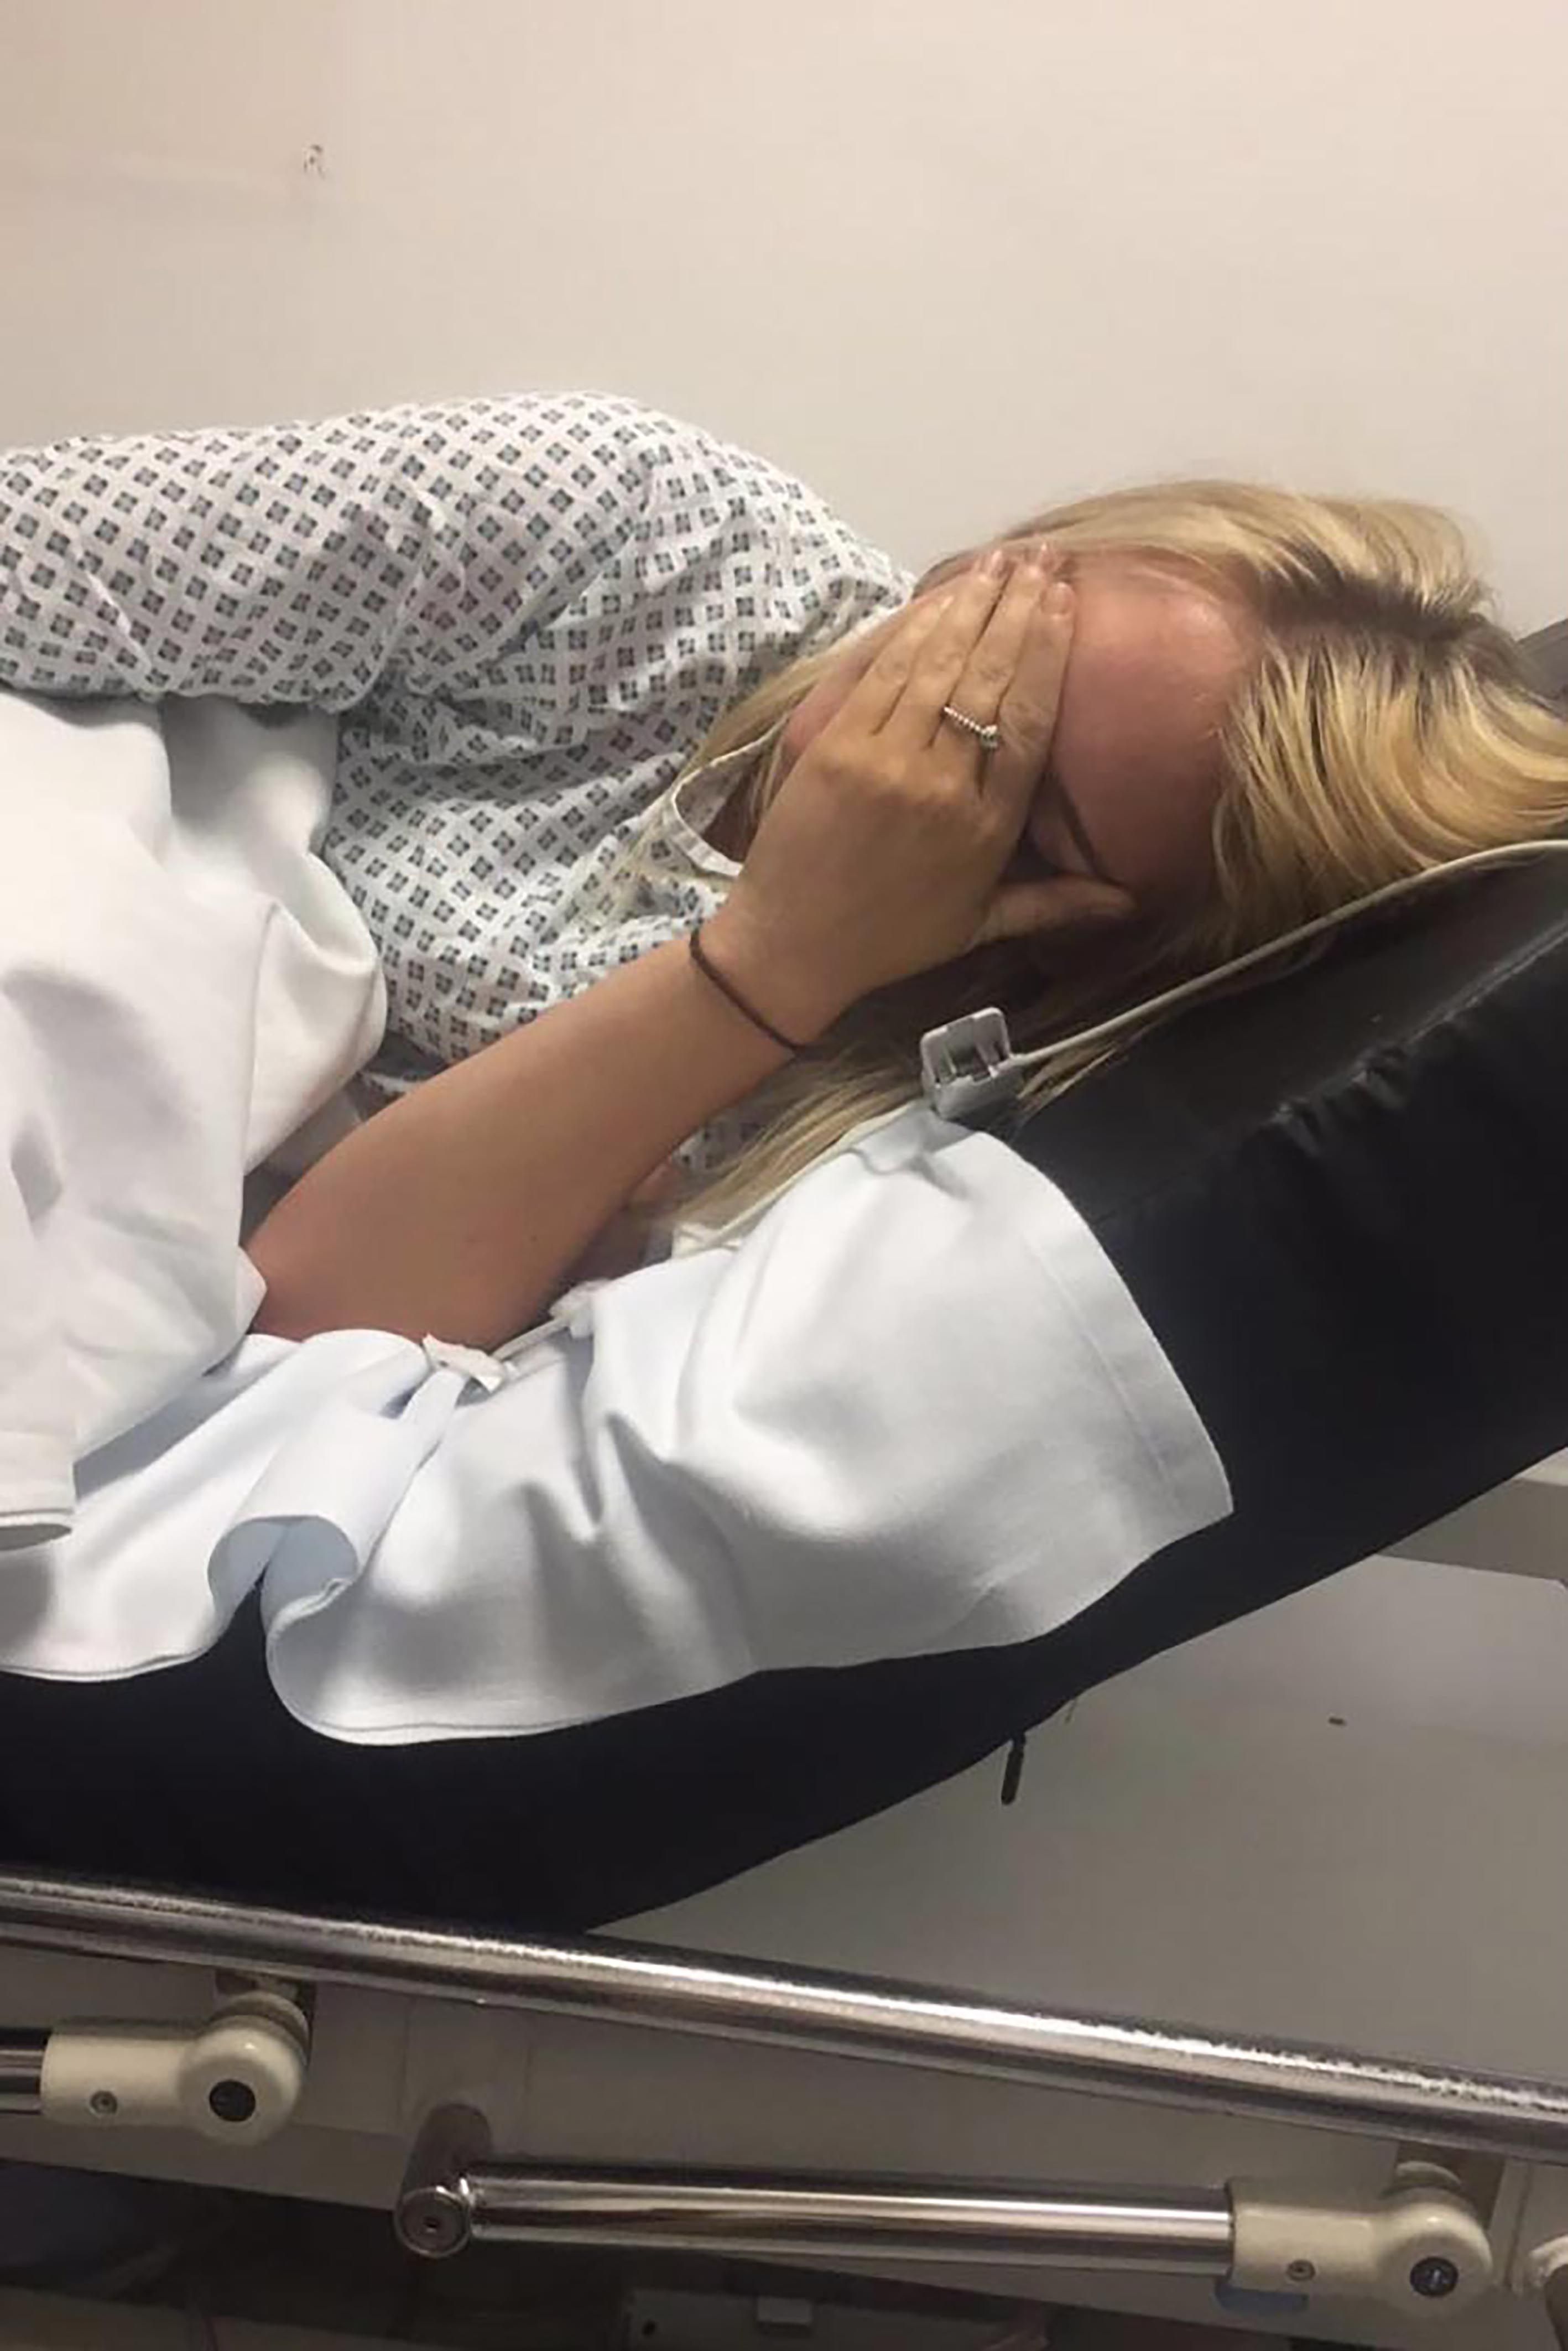 This Woman Got a Sex Toy Stuck In Her Butt Then Shared a Selfie From the Hospital After Getting It Removed pic